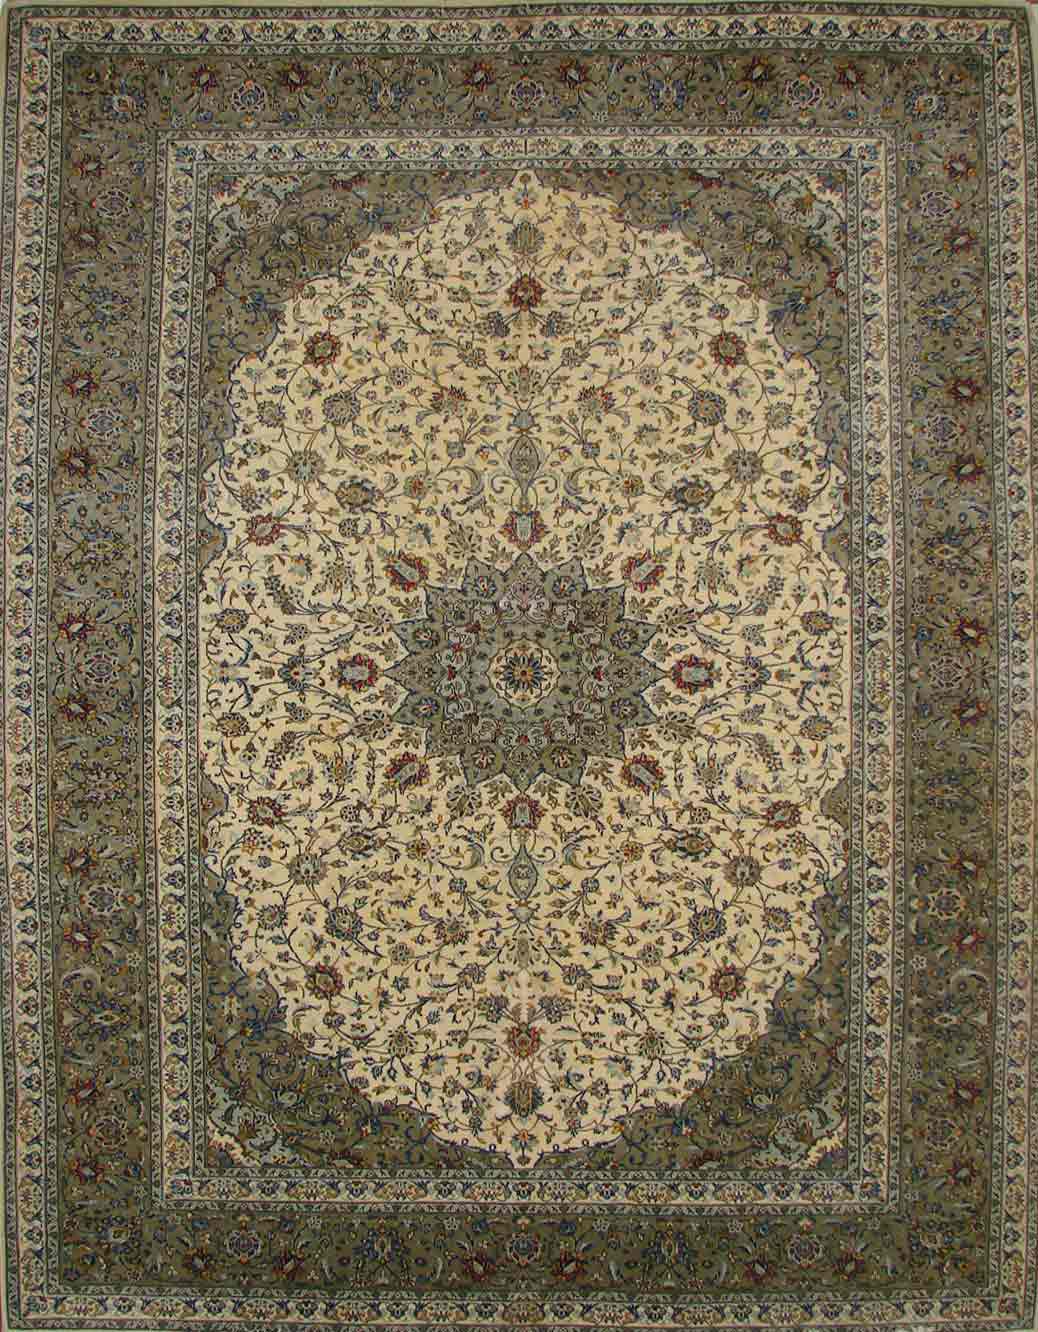 Antique Style Rugs KASHAN 62913 Ivory - Beige & Aqua - Lt. Green Hand Knotted Rug